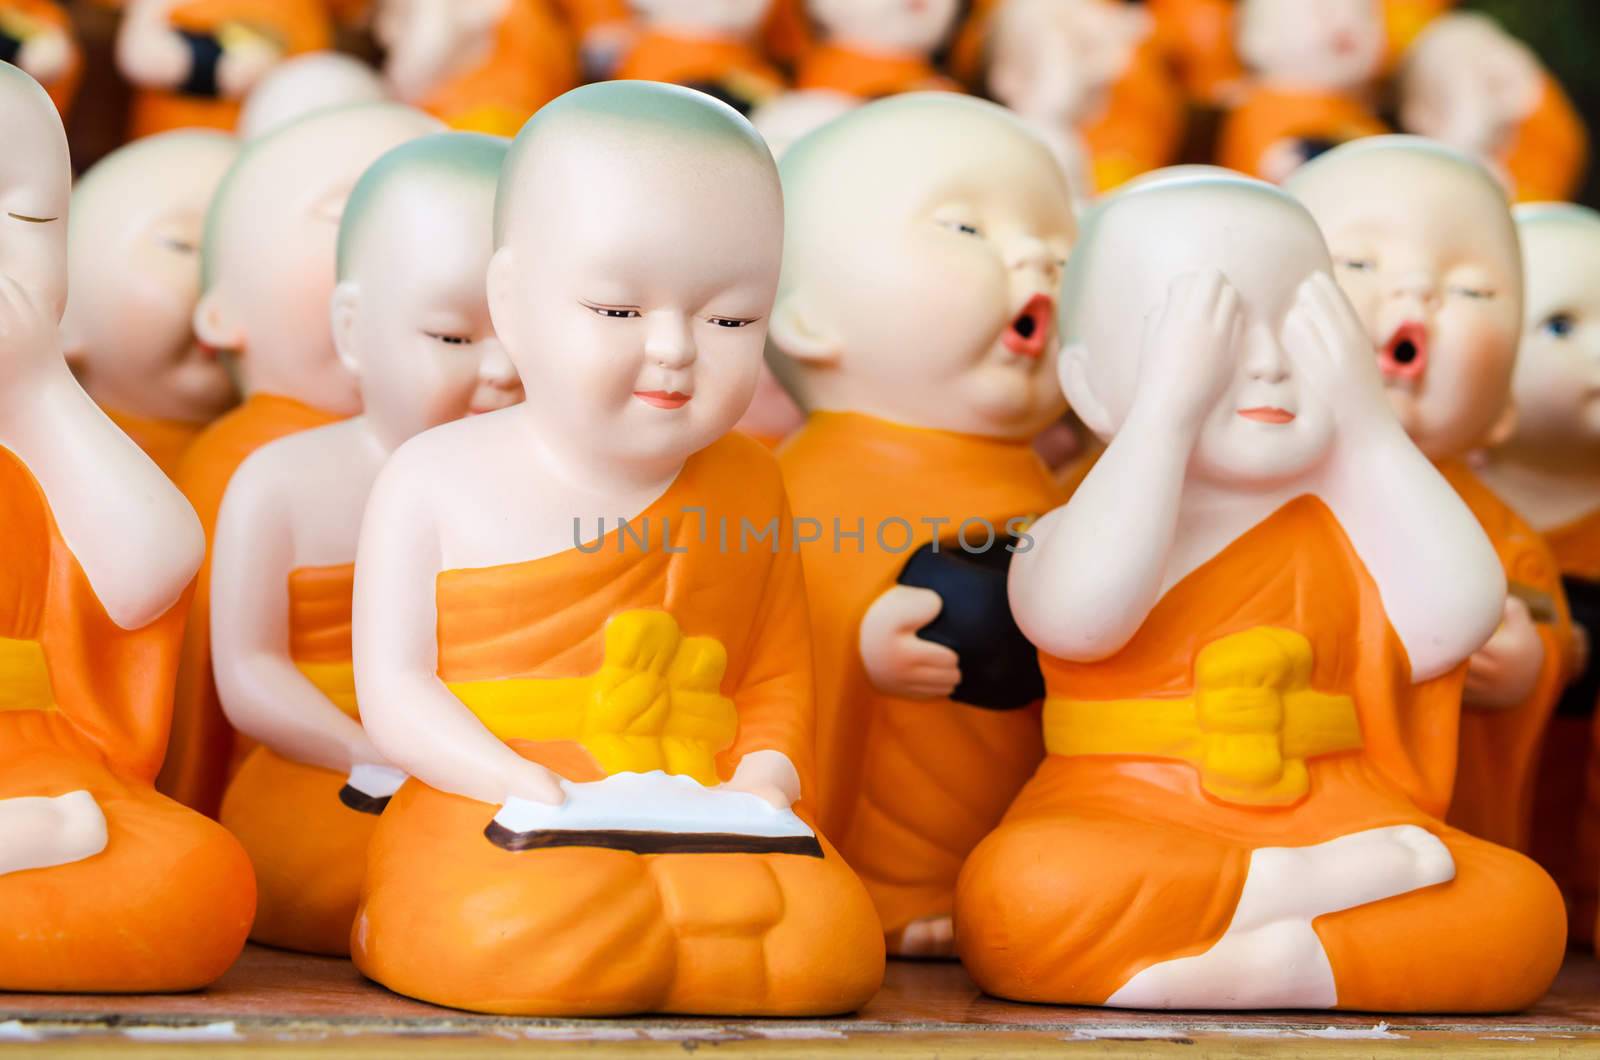 Many ceramic monk doll at temple in Thailand.